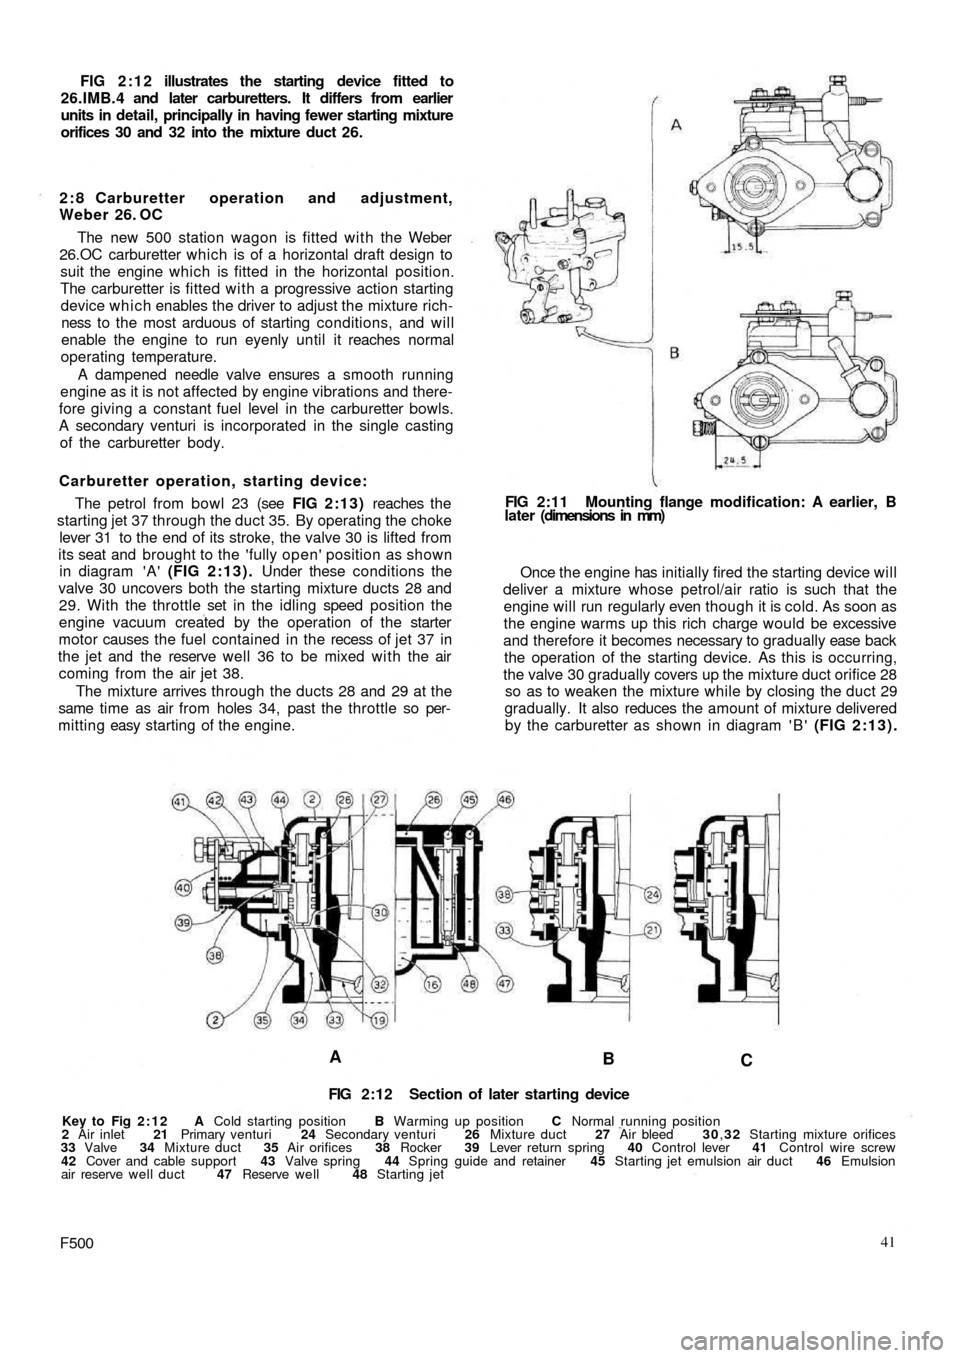 FIAT 500 1971 1.G Workshop Manual FIG 2:12 illustrates the starting device fitted to
26.IMB.4 and later carburetters. It differs from earlier
units in detail, principally in having fewer starting mixture
orifices 30 and 32 into the mi